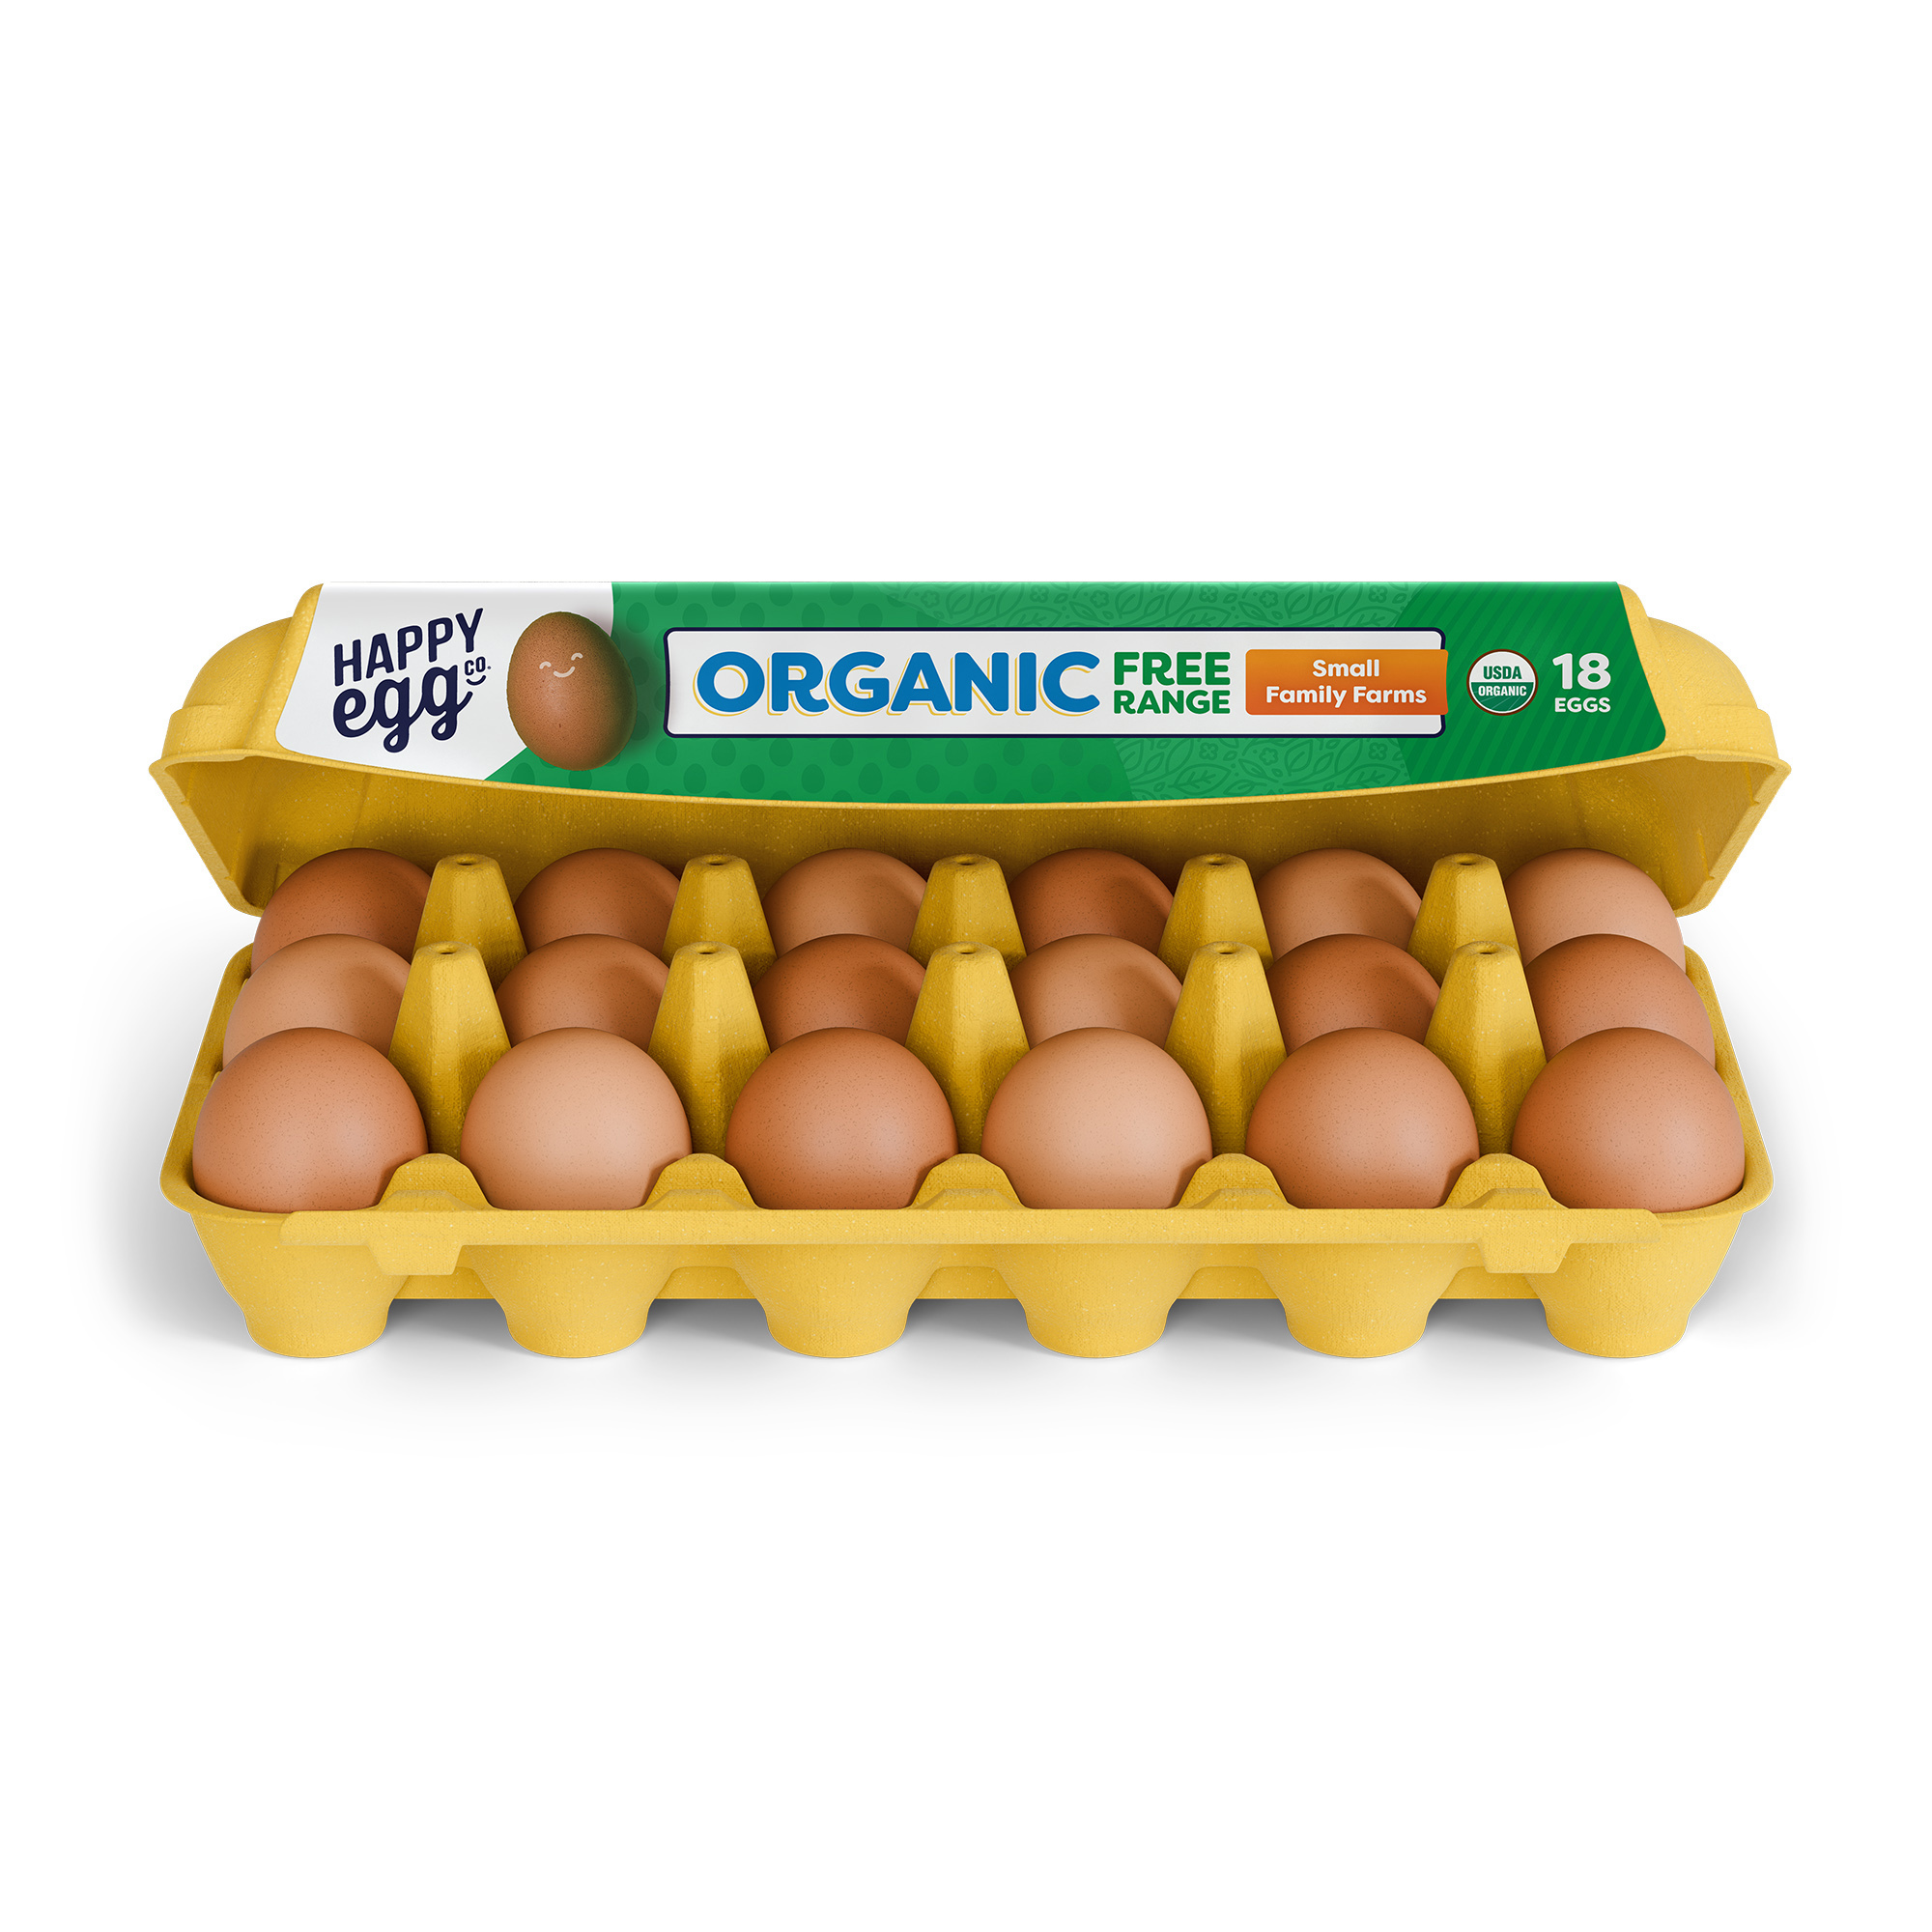 Happy Egg Co Organic Free-Range Large Brown Eggs, 18 Count - image 1 of 6